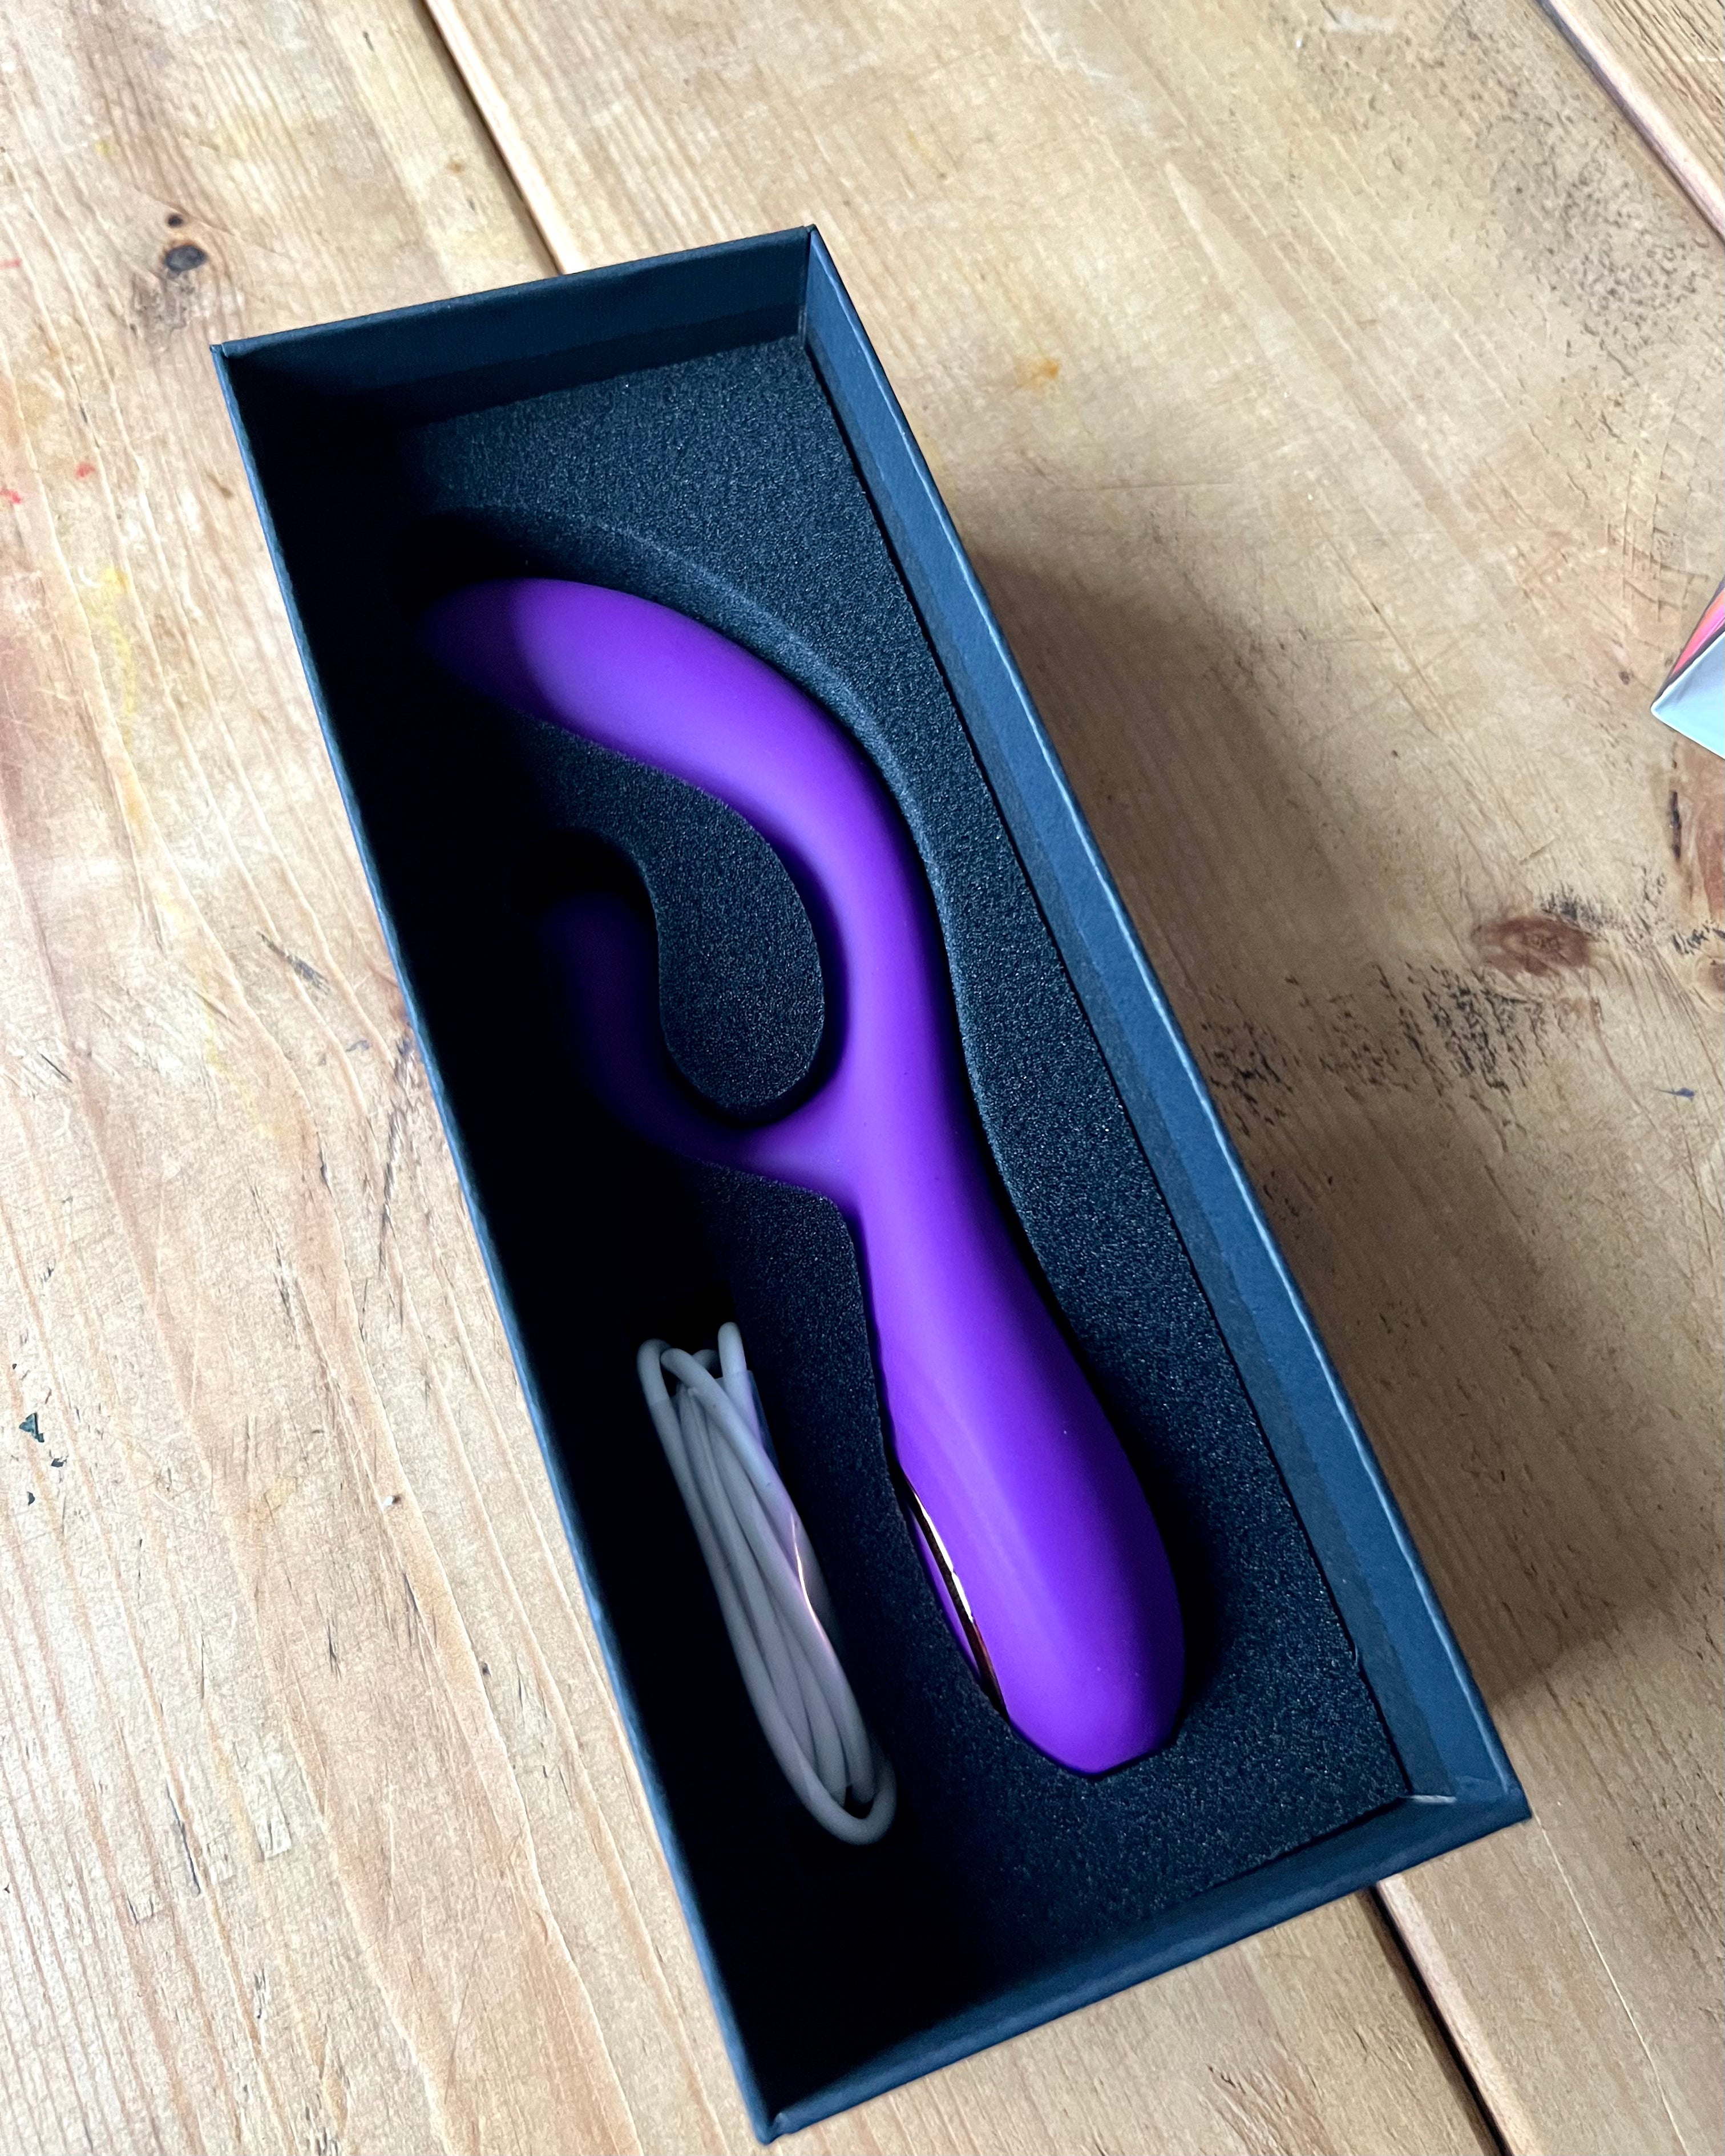 Sex toy inside the box